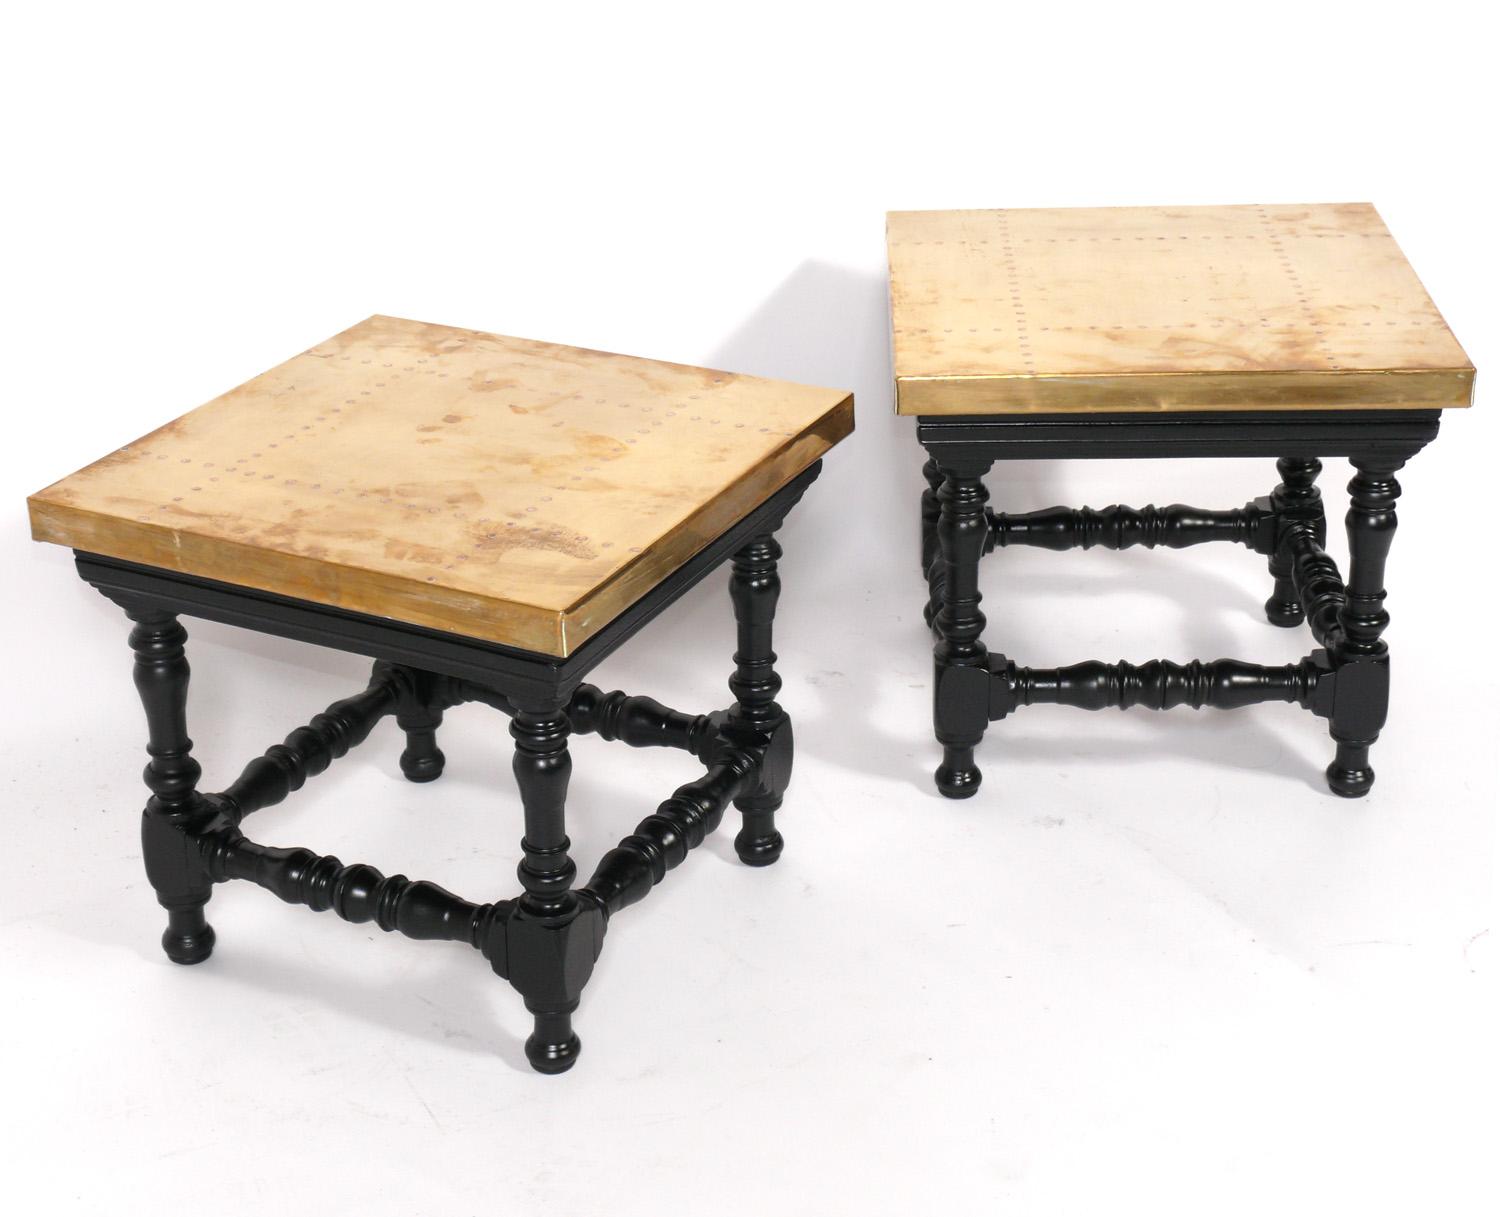 Painted Brass and Black Finished Wood Tables